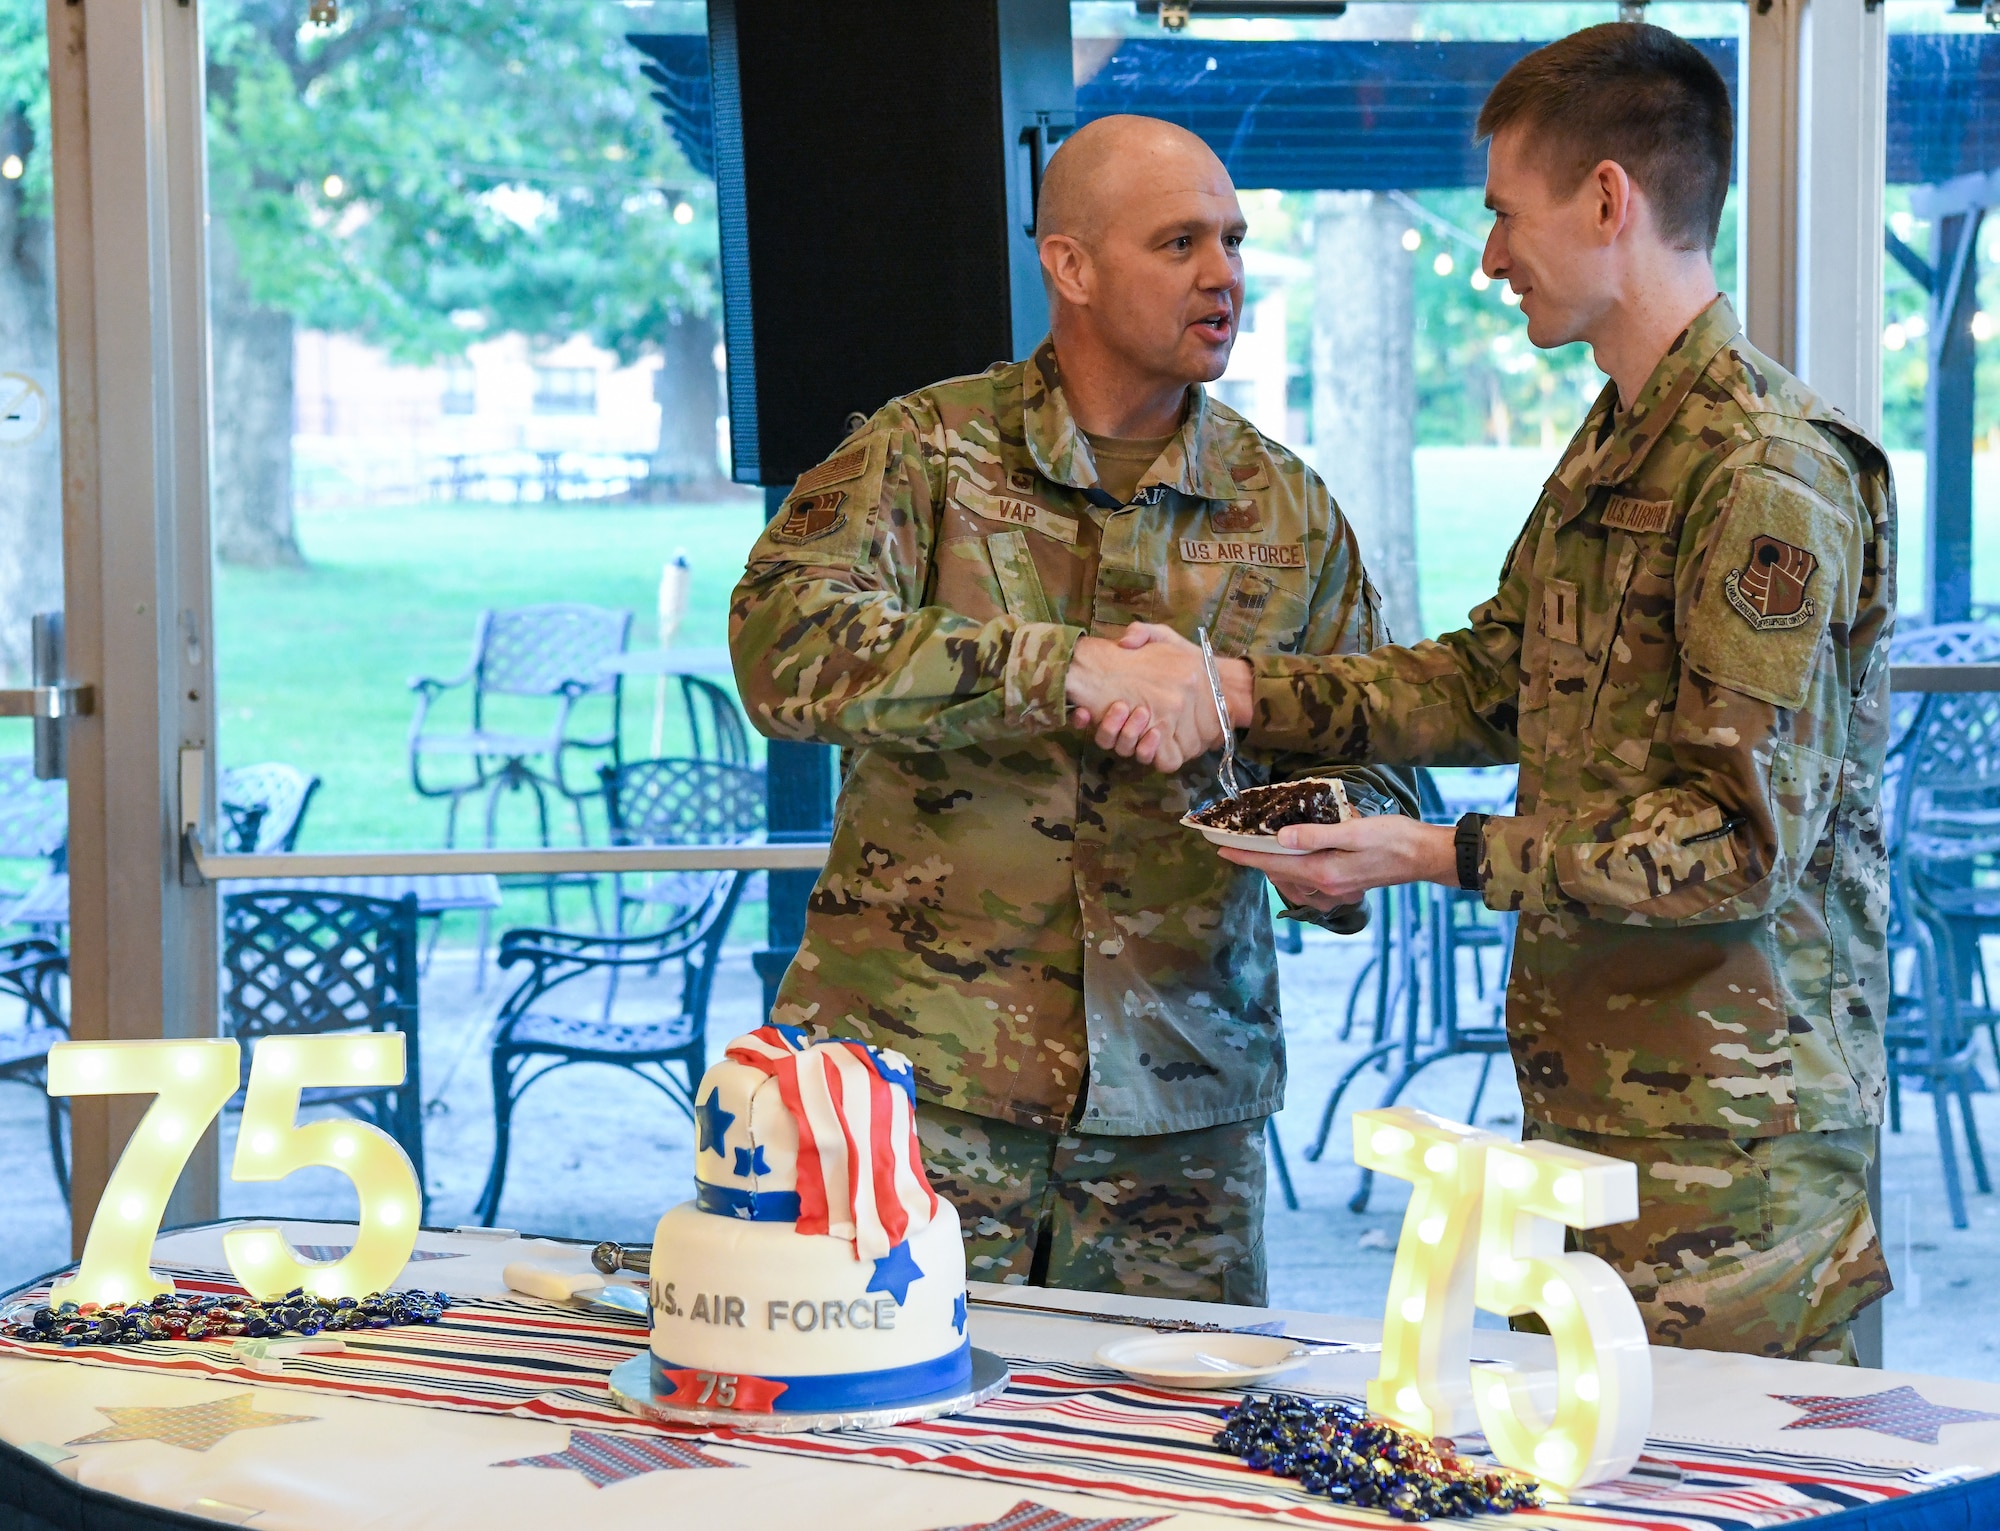 Airman shaking hands and serving cake to another Airman